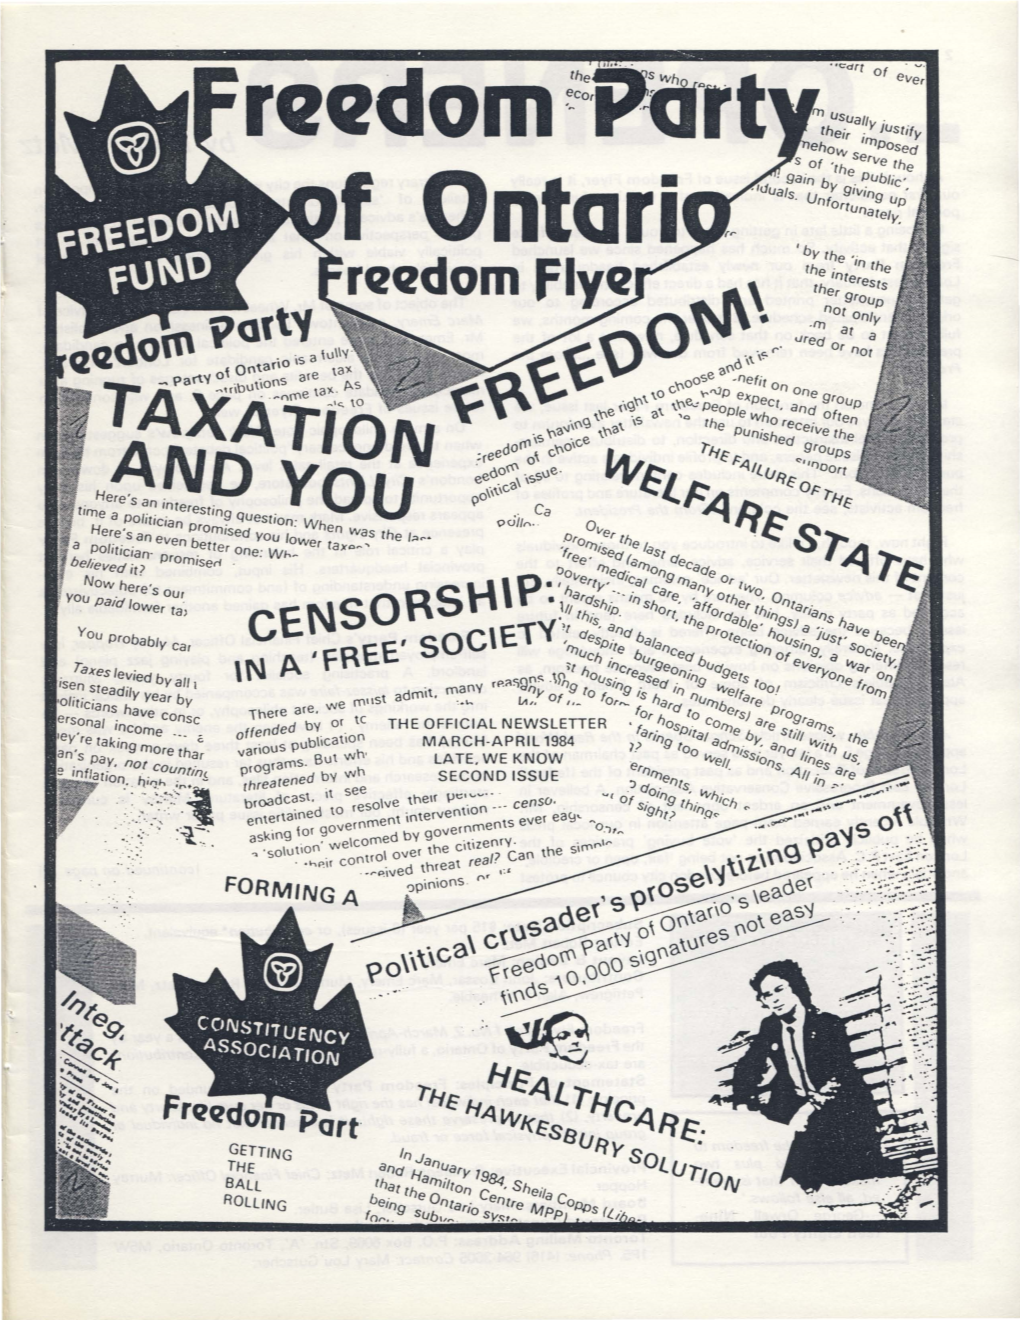 Freedom Party of Ontario, a Fully-Registered Political Party